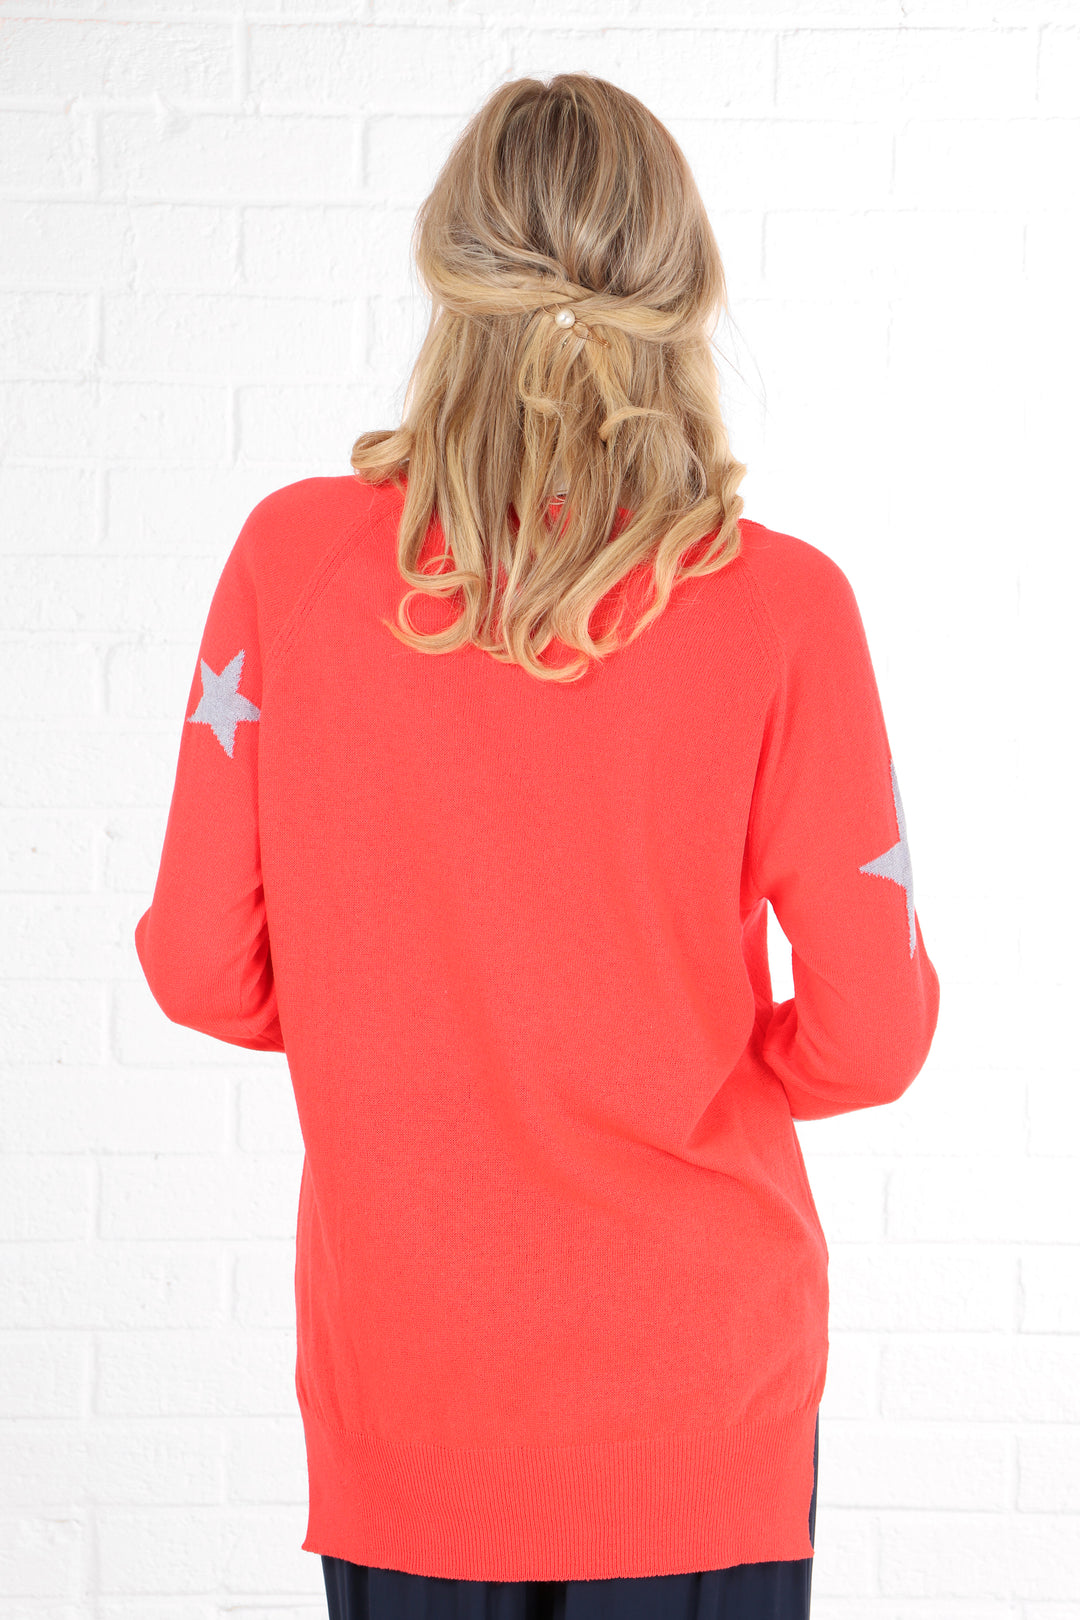 model showing that the back of the cotton jumper is plain coral and has no star pattern on it.